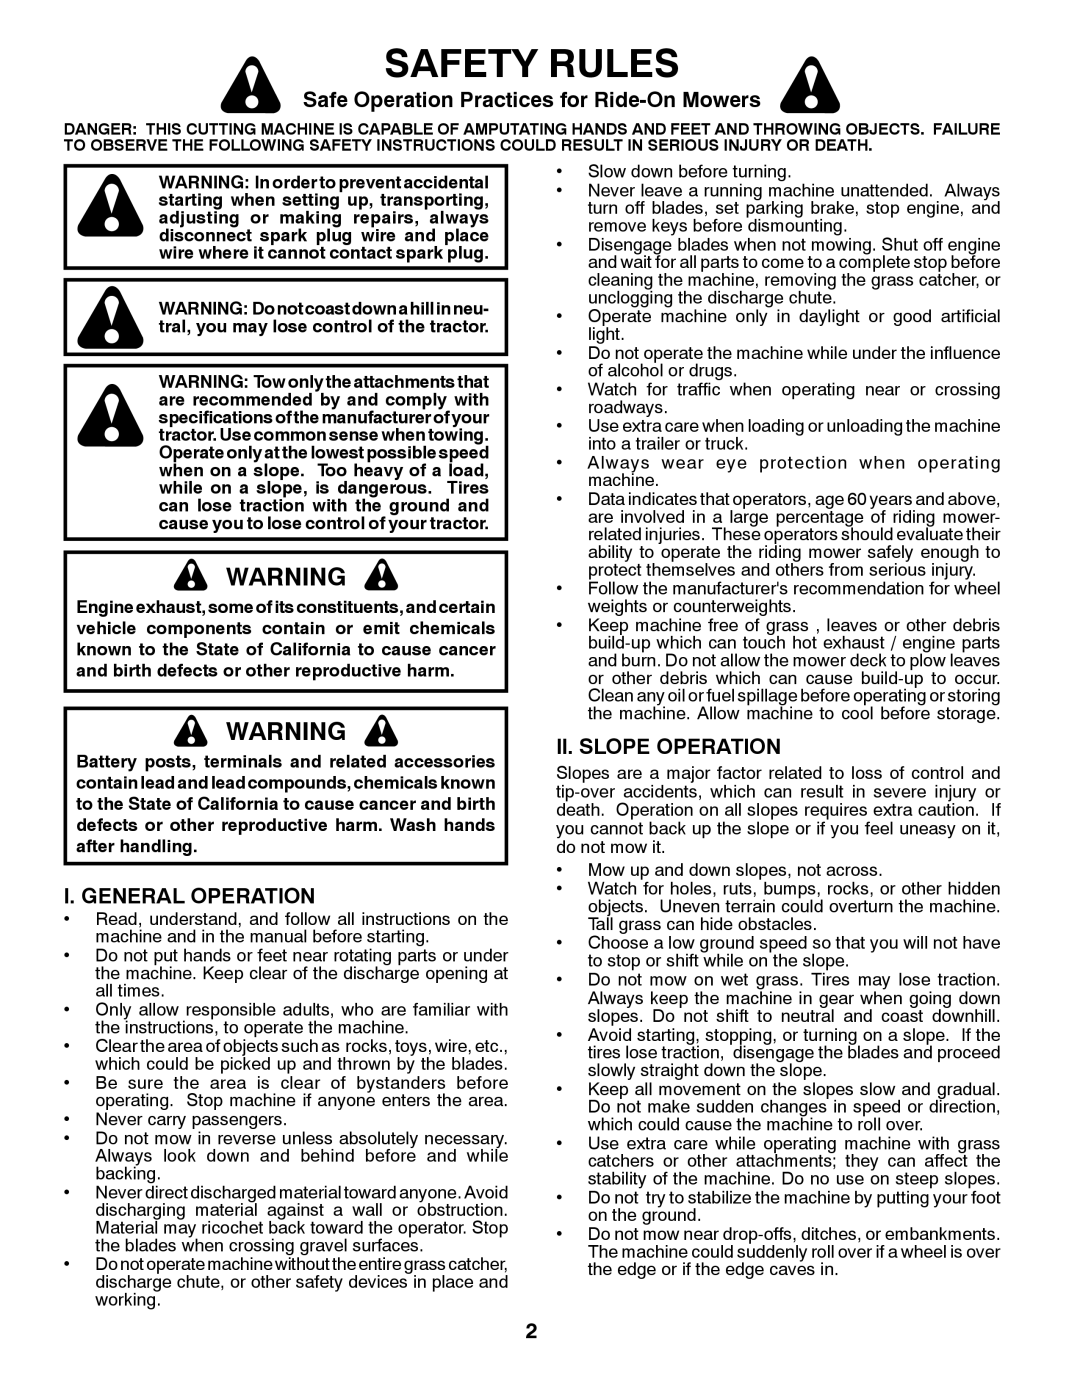 Poulan PXT12538 manual Safety Rules, Safe Operation Practices for Ride-On Mowers, I. General Operation, Ii. Slope Operation 